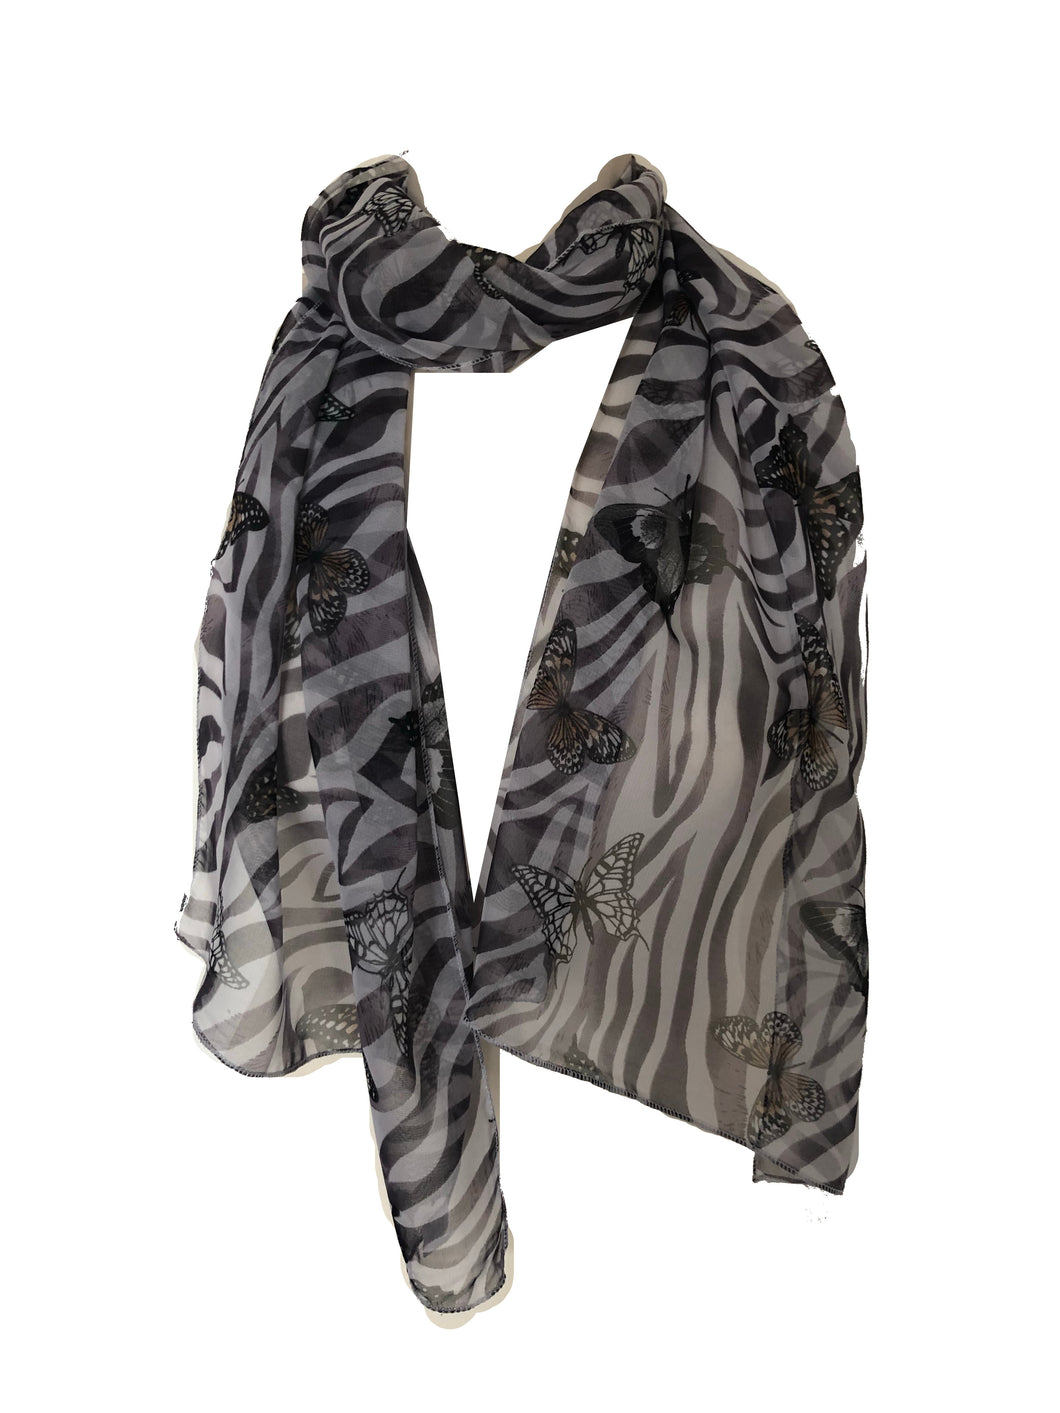 White with Brown Zebra Animal Print with Butterflies Chiffon Style Thin Scarf.